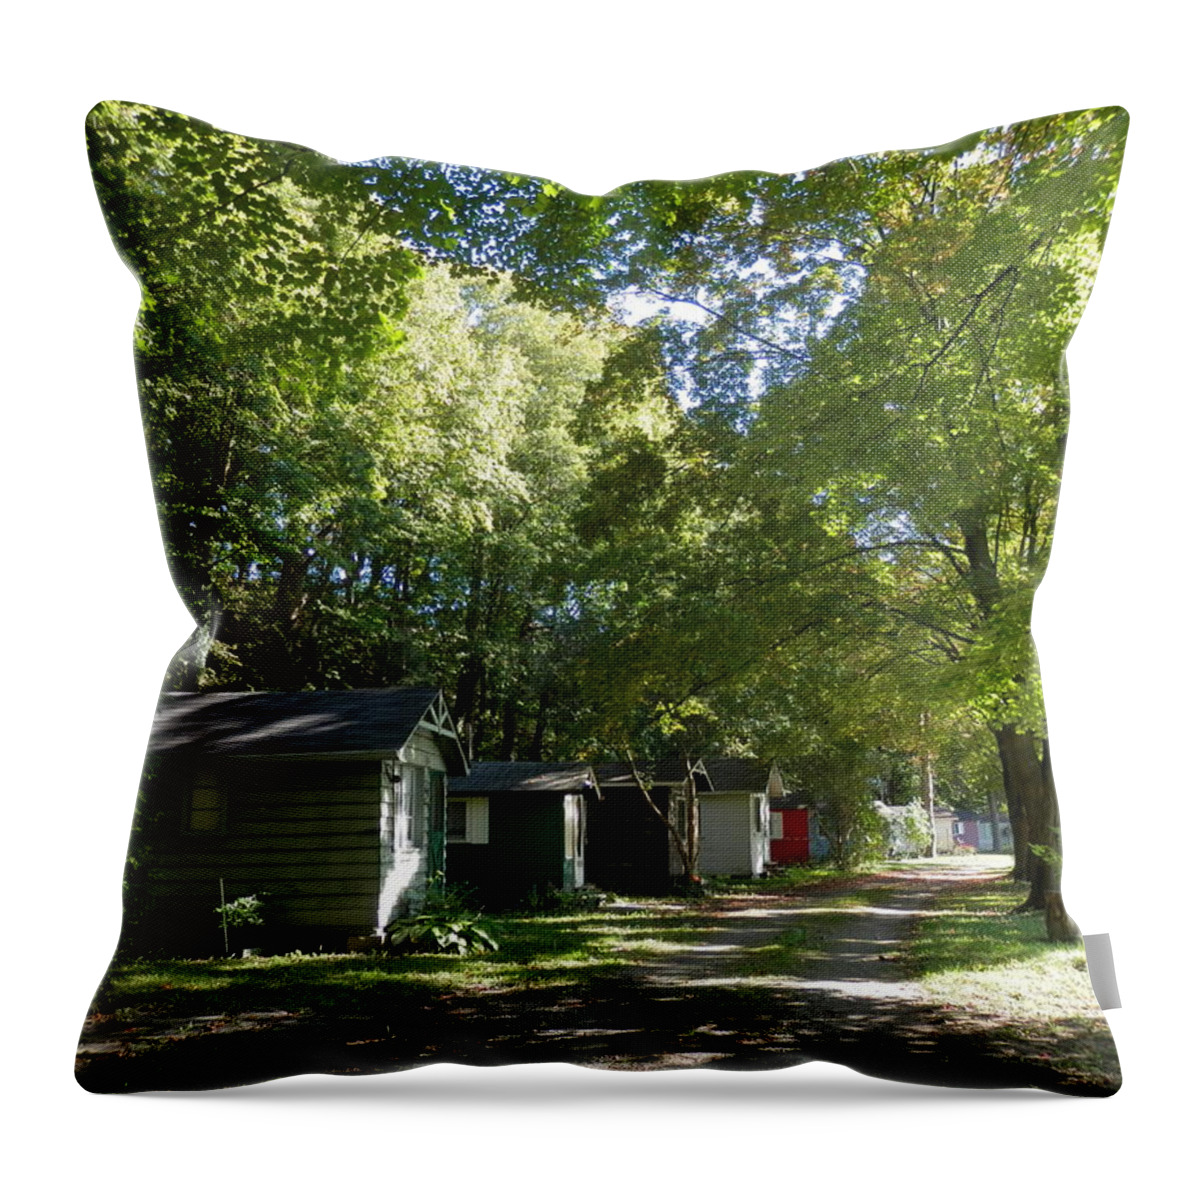 Cabins Throw Pillow featuring the photograph Little Cabins 1 by Pema Hou